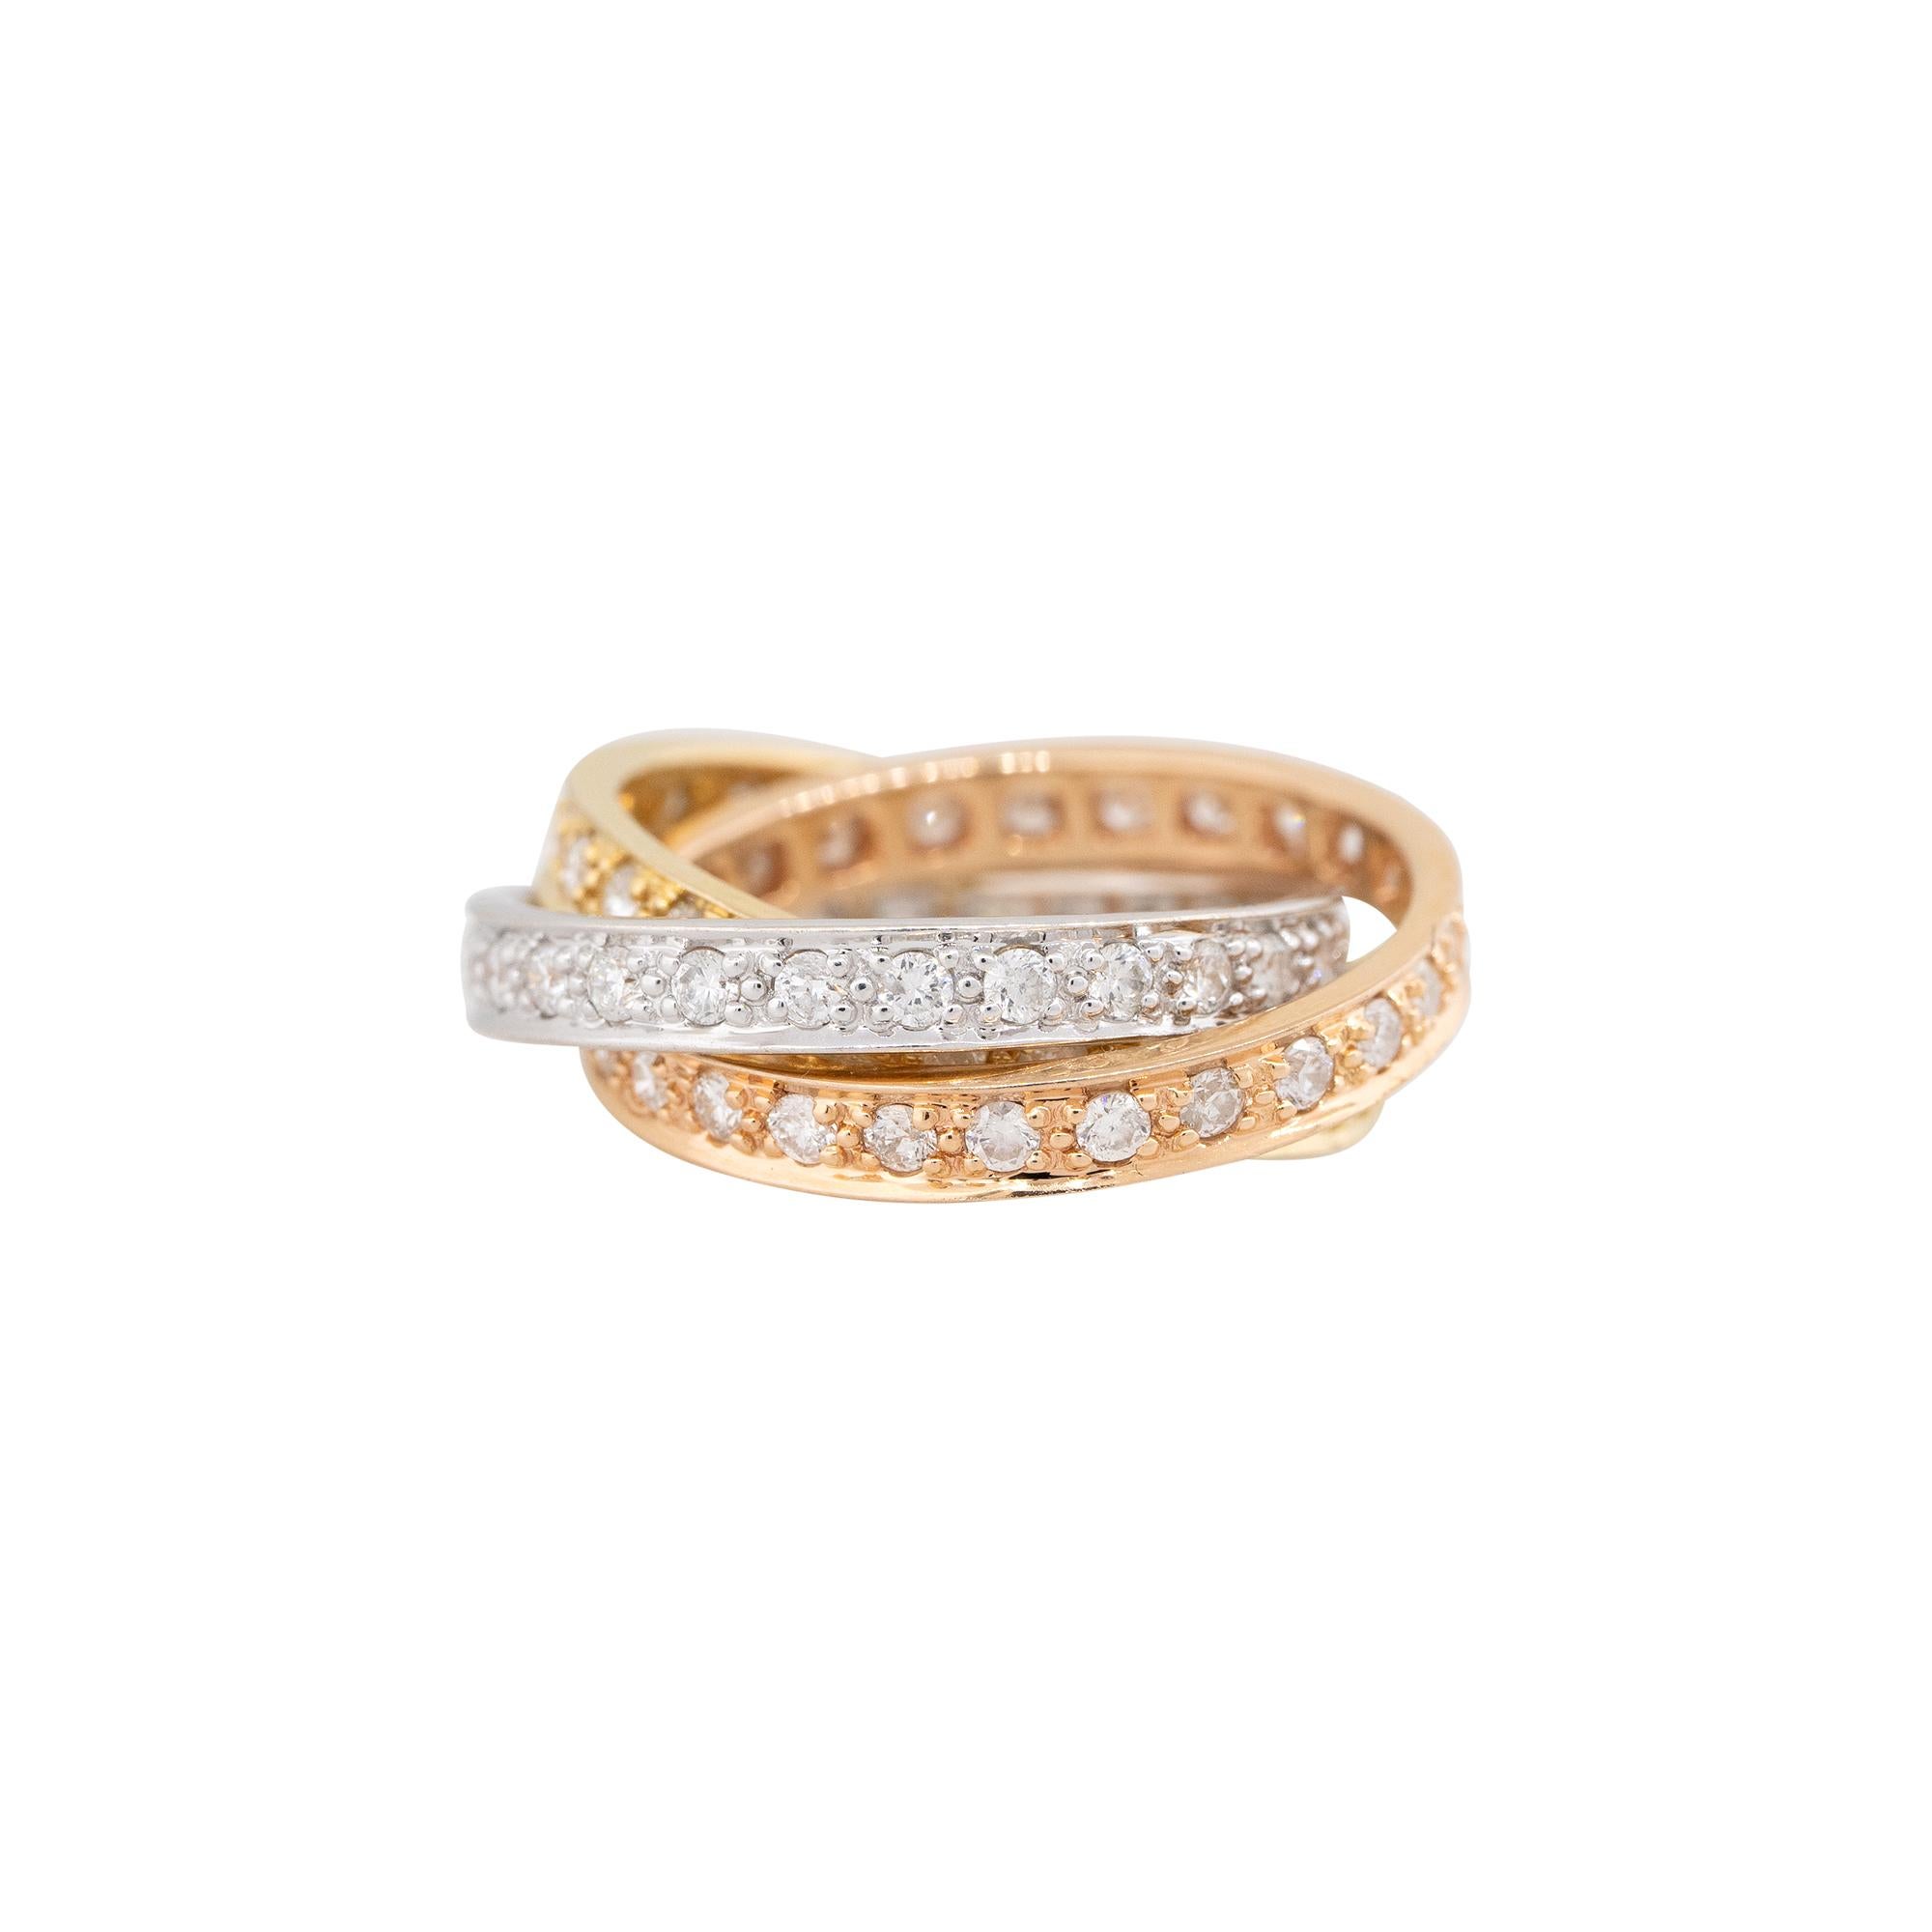 18k Tri-Color Gold 1.84ctw Diamond Rolling Ring
Product: Rolling Ring Set of 3 (all attached)
Material: 18k White Gold, 18k Rose Gold, 18k Yellow Gold
Diamond Details: There are approximately 1.84 carats of Round Brilliant cut diamonds (78